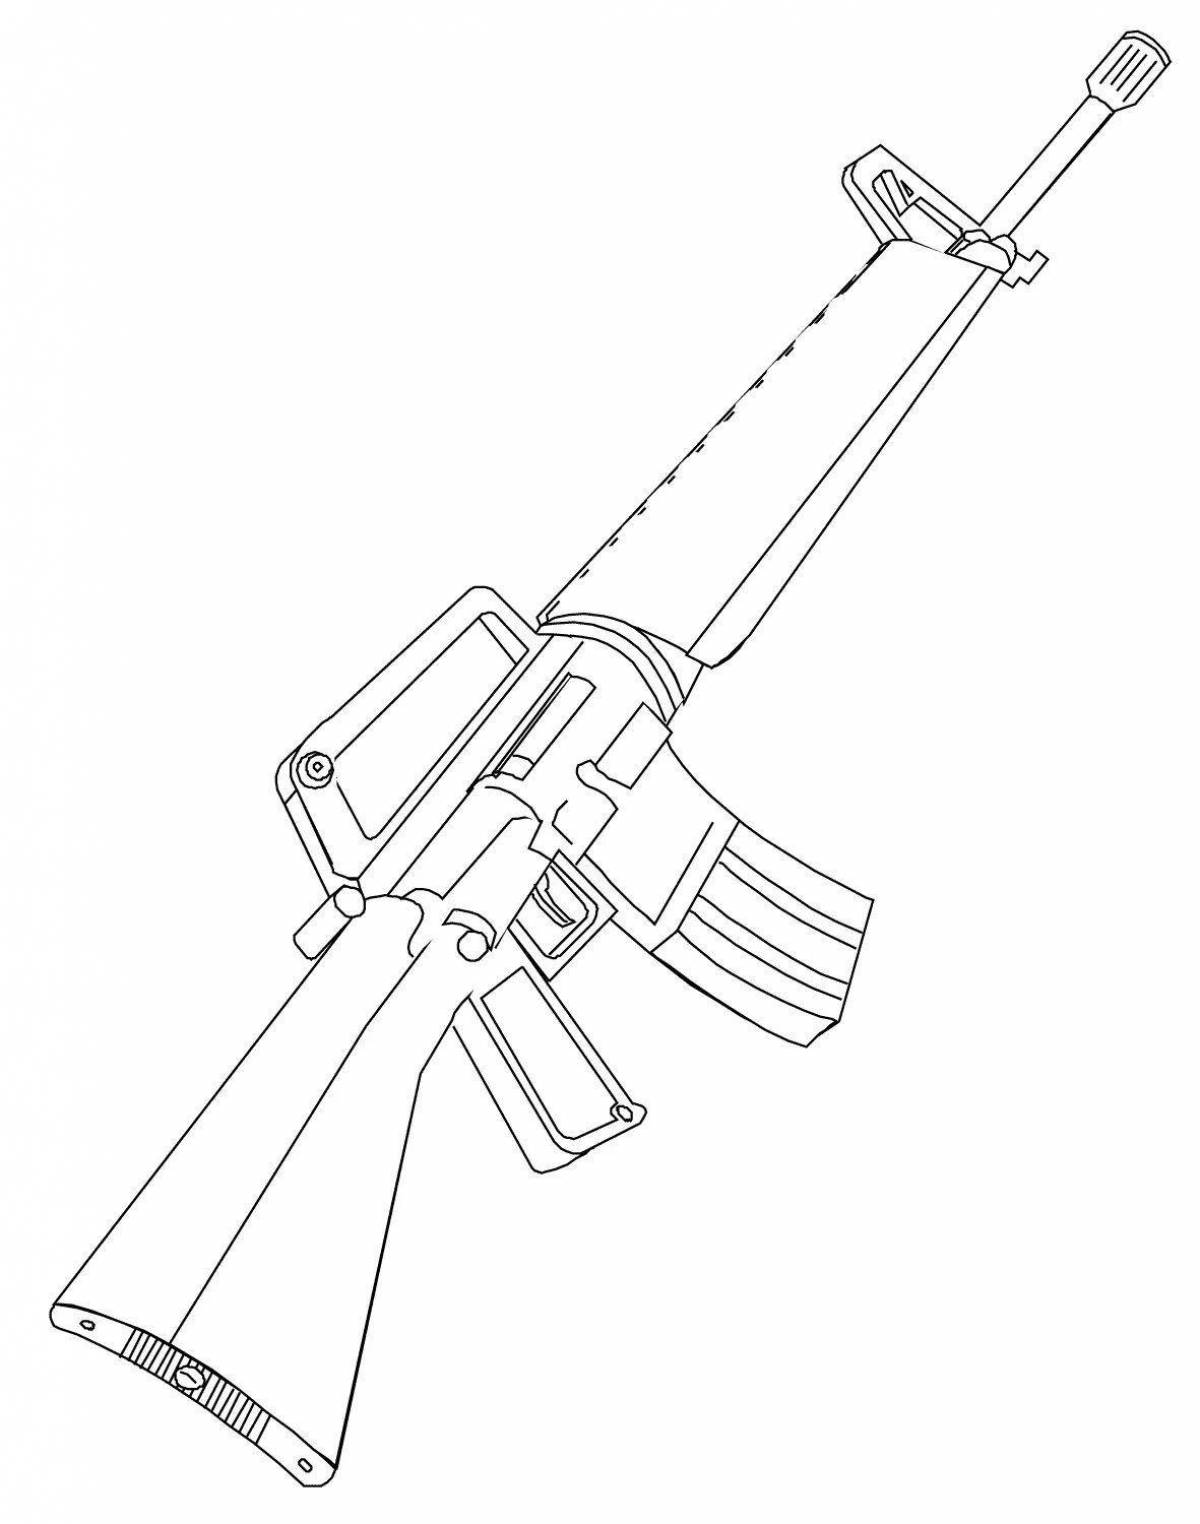 Unique military weapons coloring page